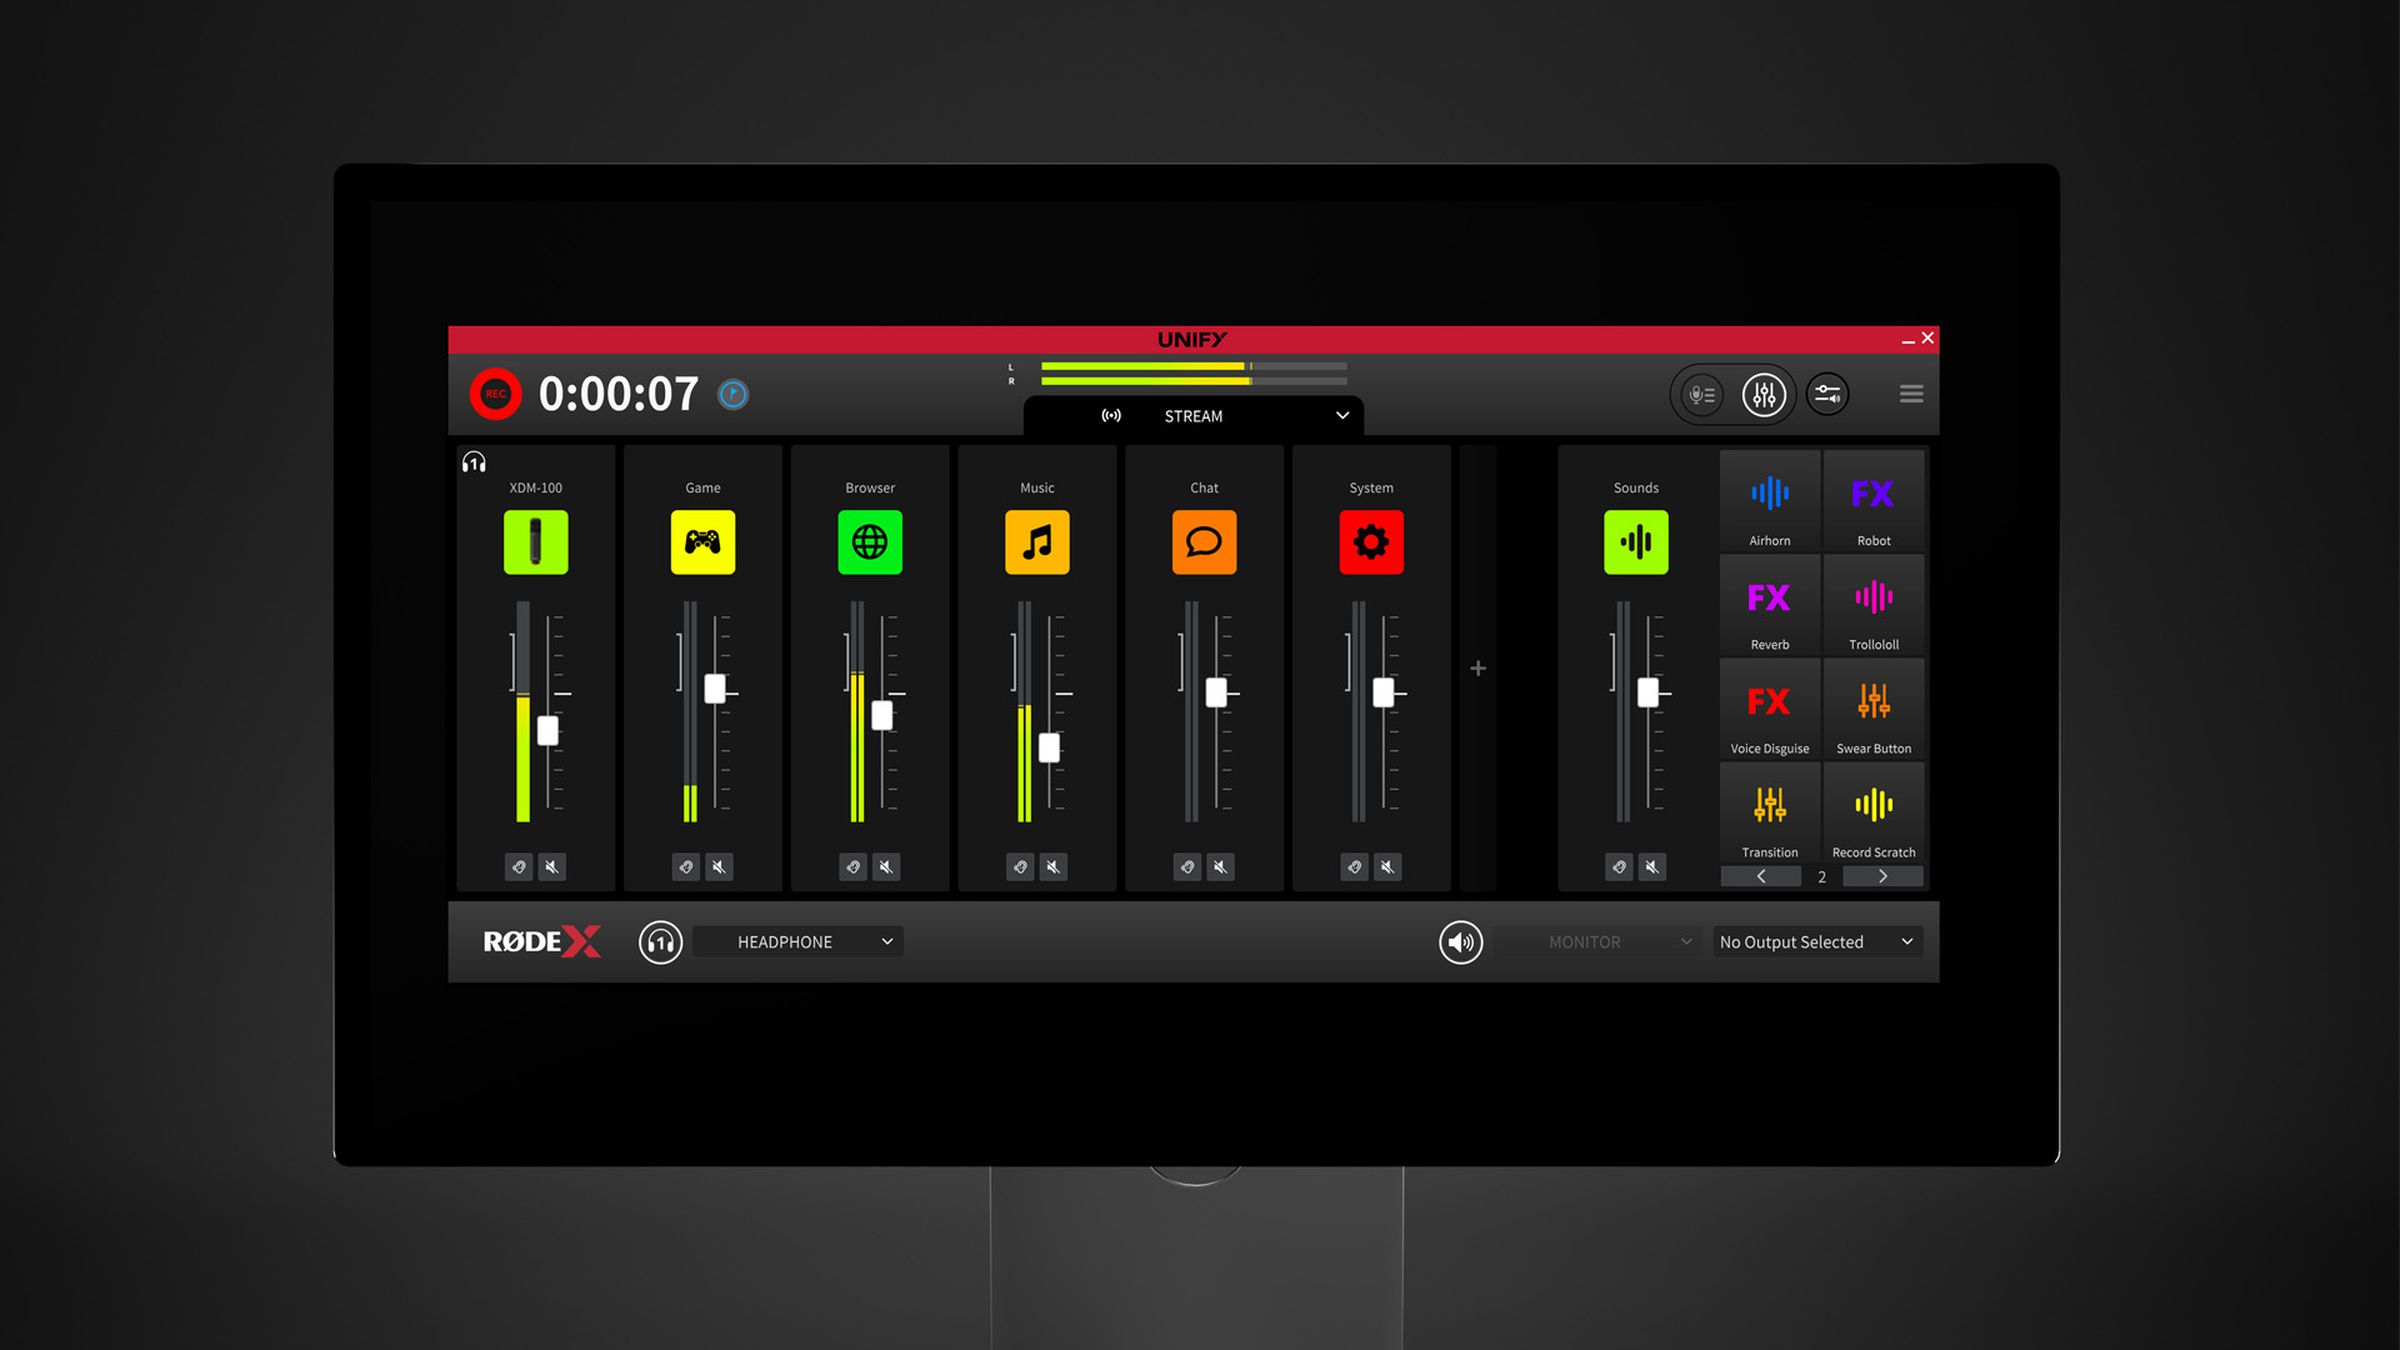 Rode X’s Unify audio mixing software as it would appear on a desktop computer.